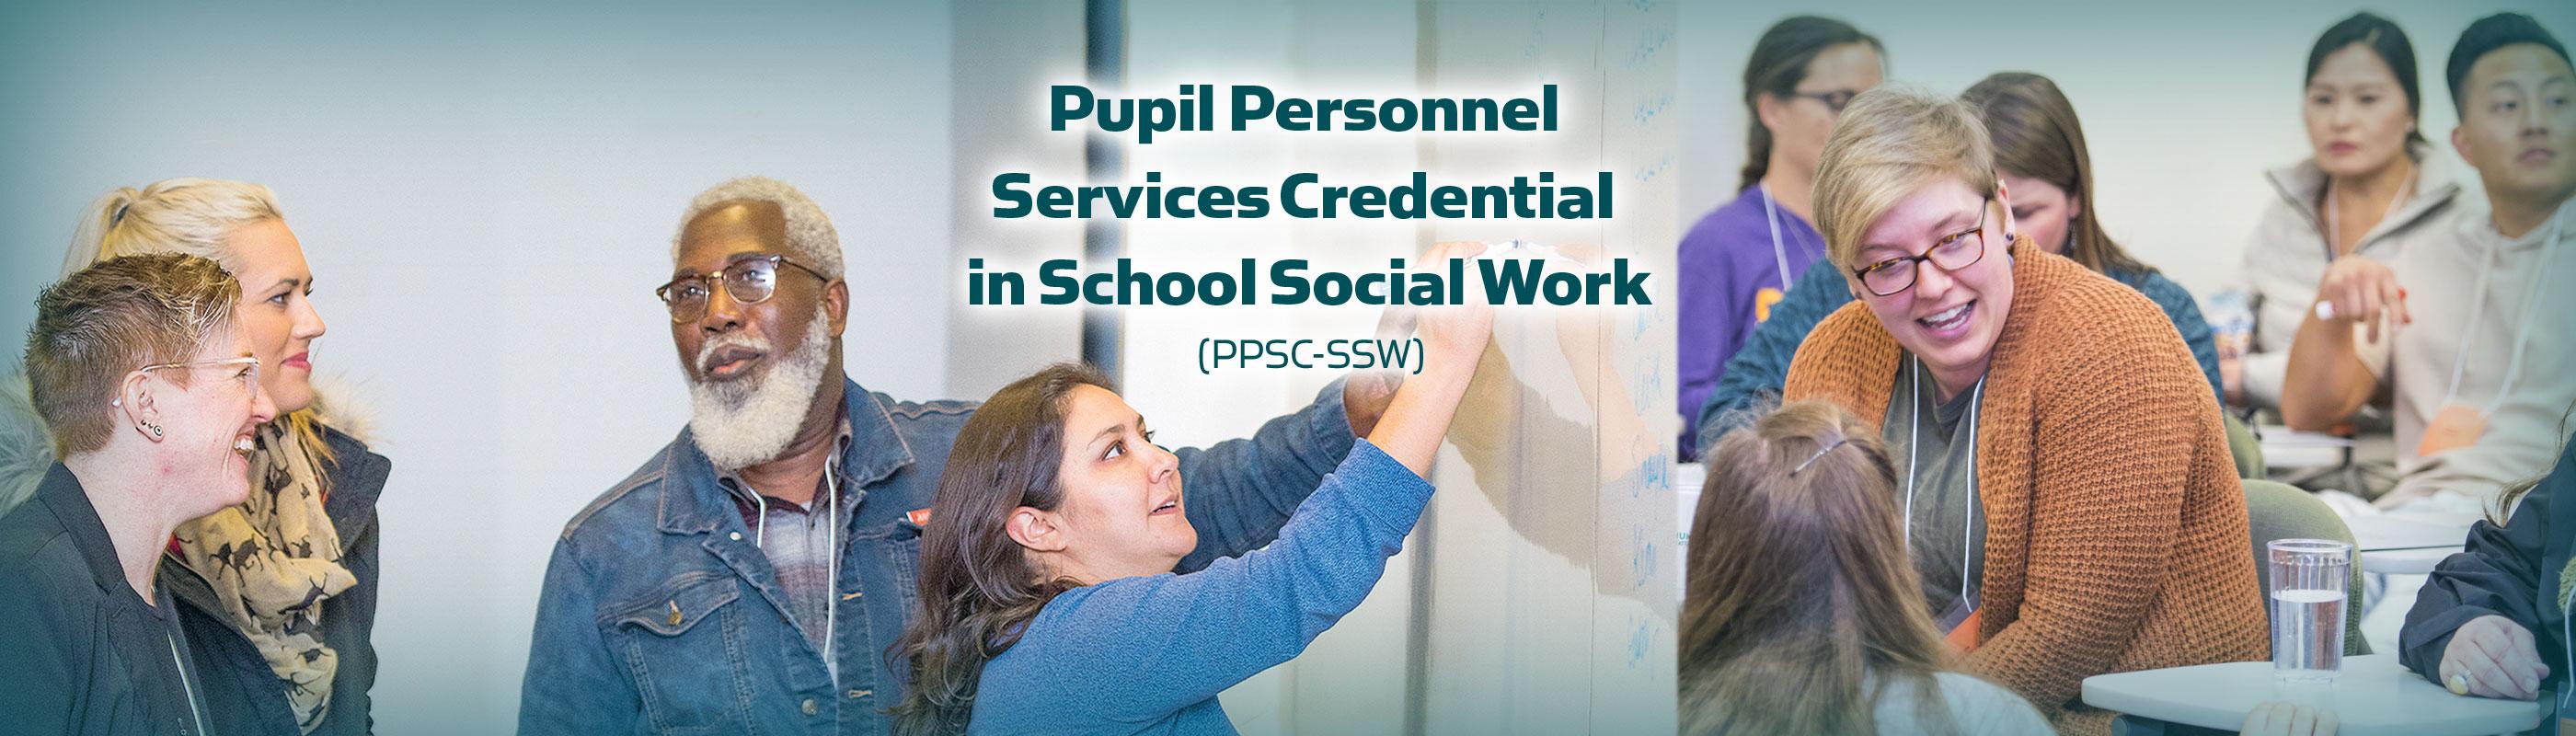 sac state pupil personnel services credential